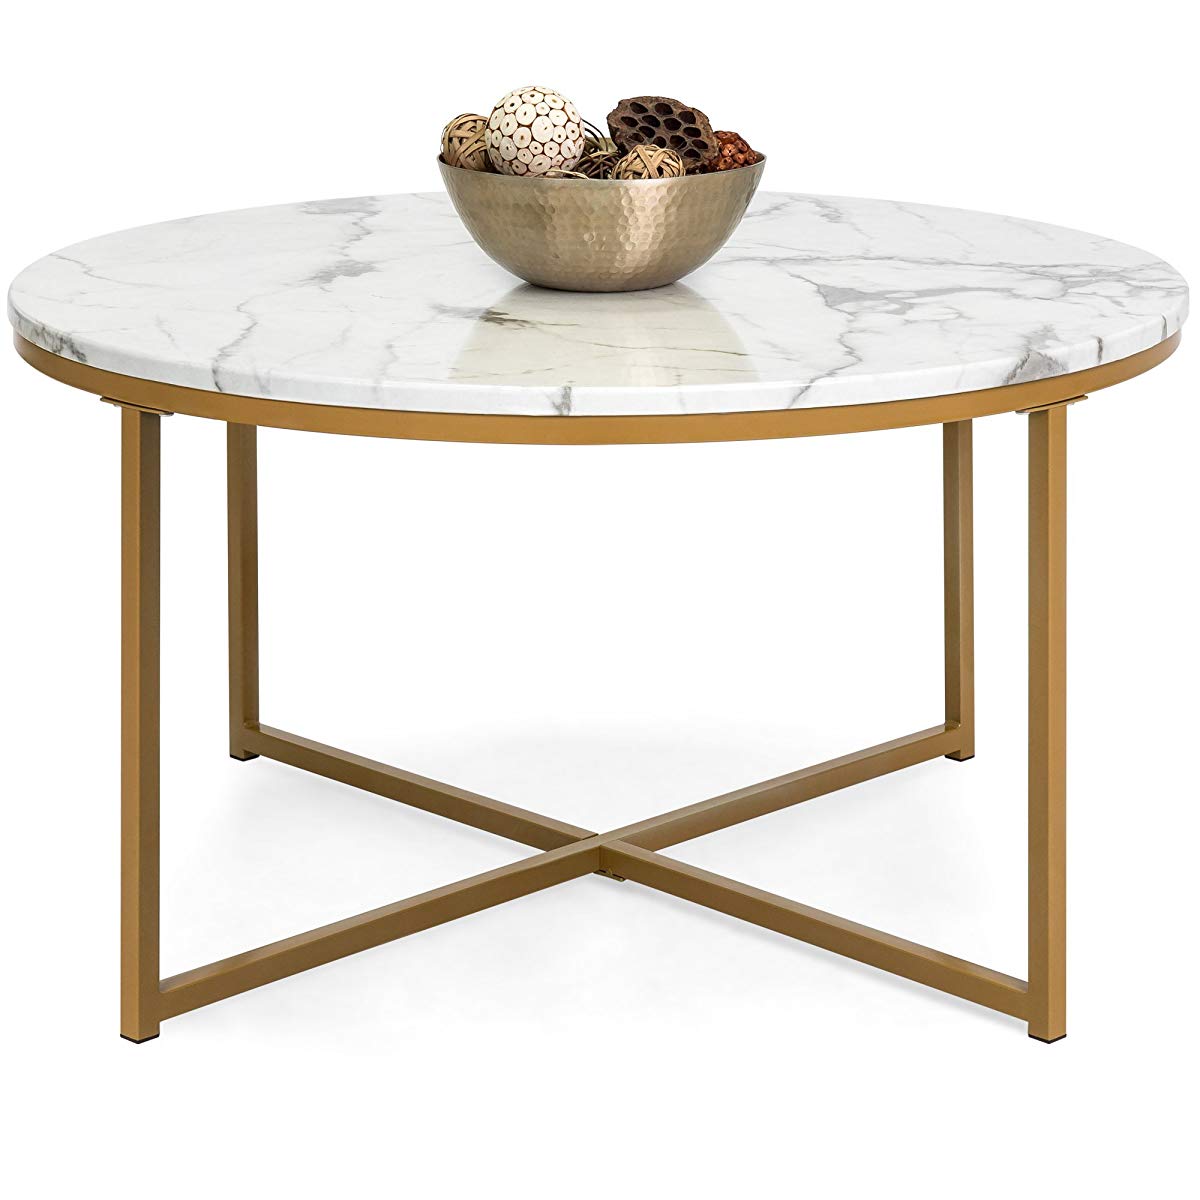 best choice products modern living room round faux marble top metal accent side table coffee white dining shabby chic chest drawers glass end patchwork armchair rod iron tables